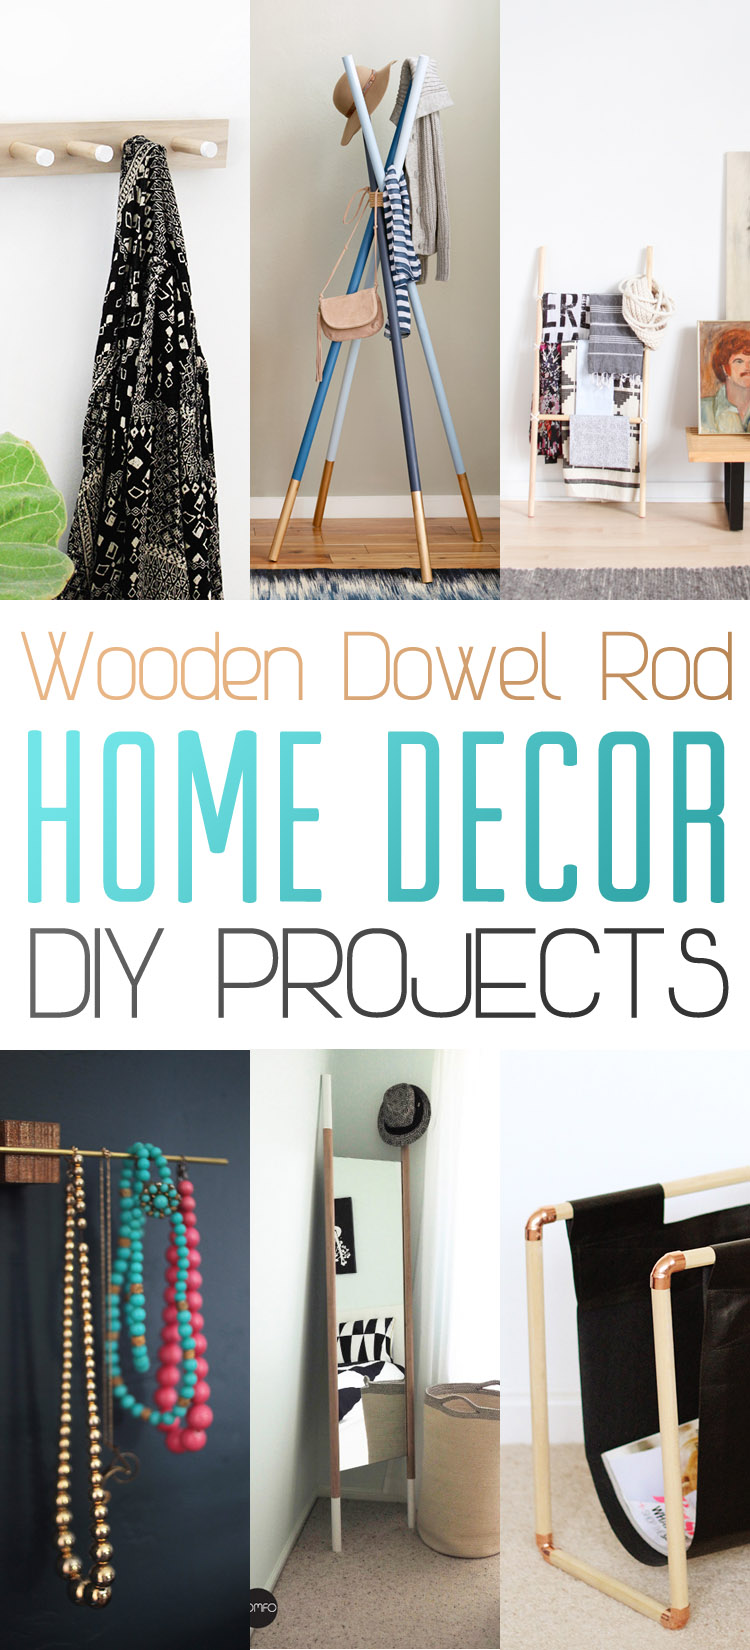 Wooden Dowel Rod Home Decor DIY Projects - The Cottage Market